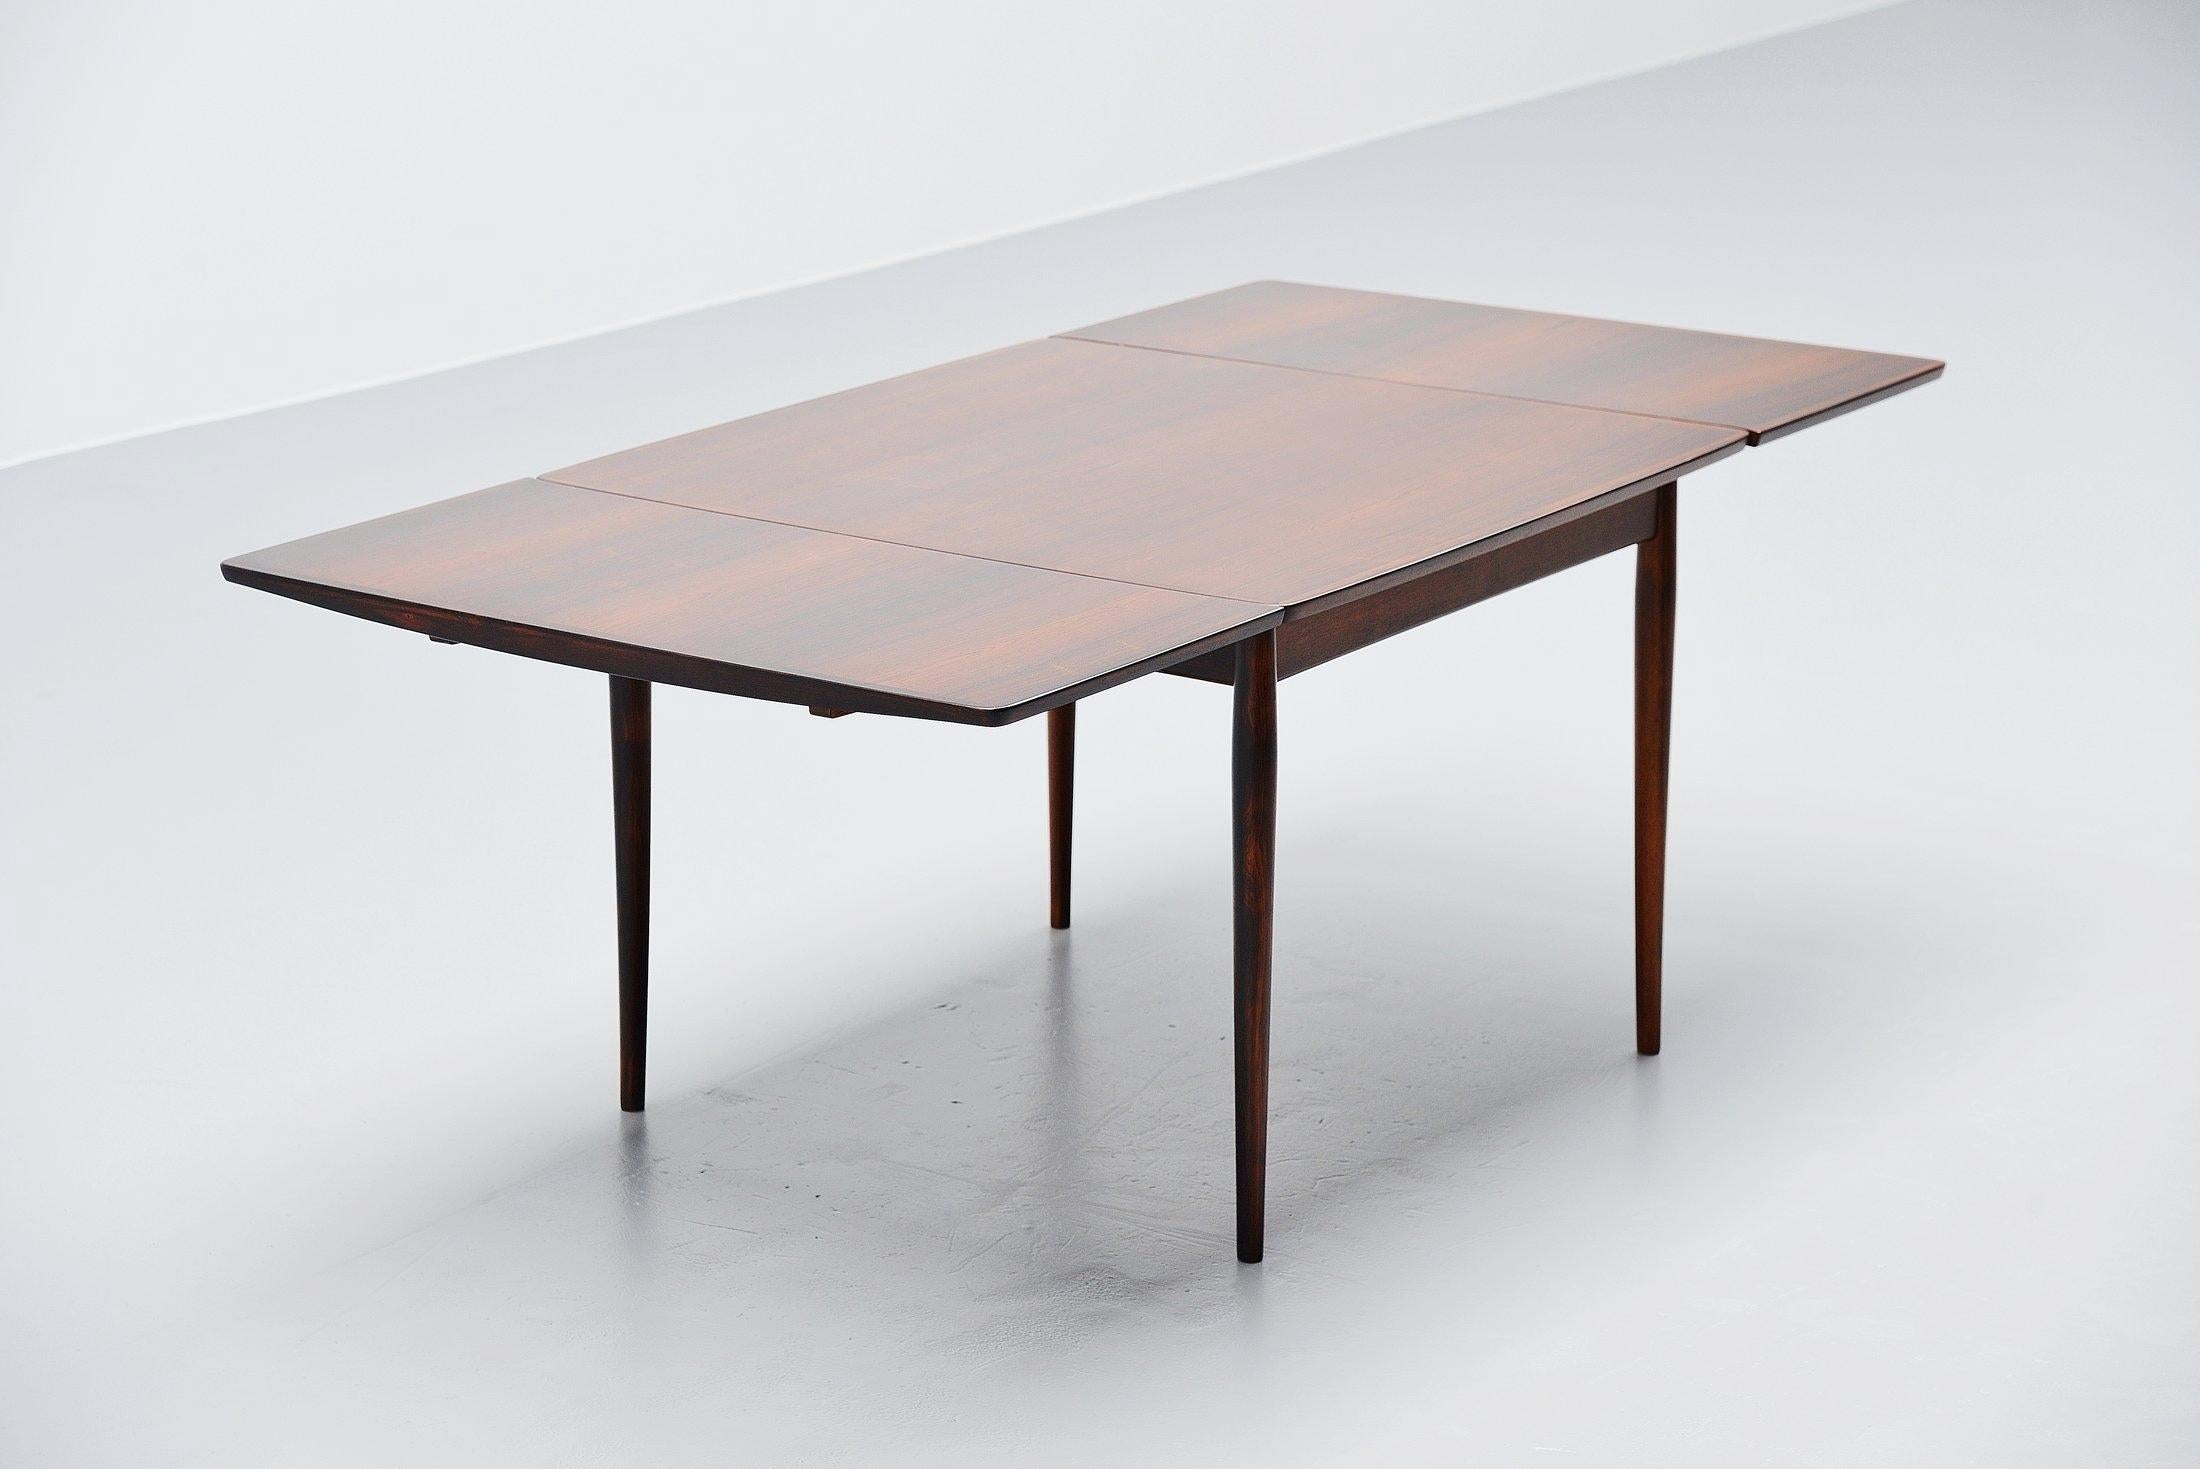 Very nice small rosewood dining table model #220 designed by Arne Vodder and manufactured by Sibast mobler, Denmark, 1960. This is for a very nice subtle sized table in very nice grained rosewood. The table has 2 extension leaves and can turn from a